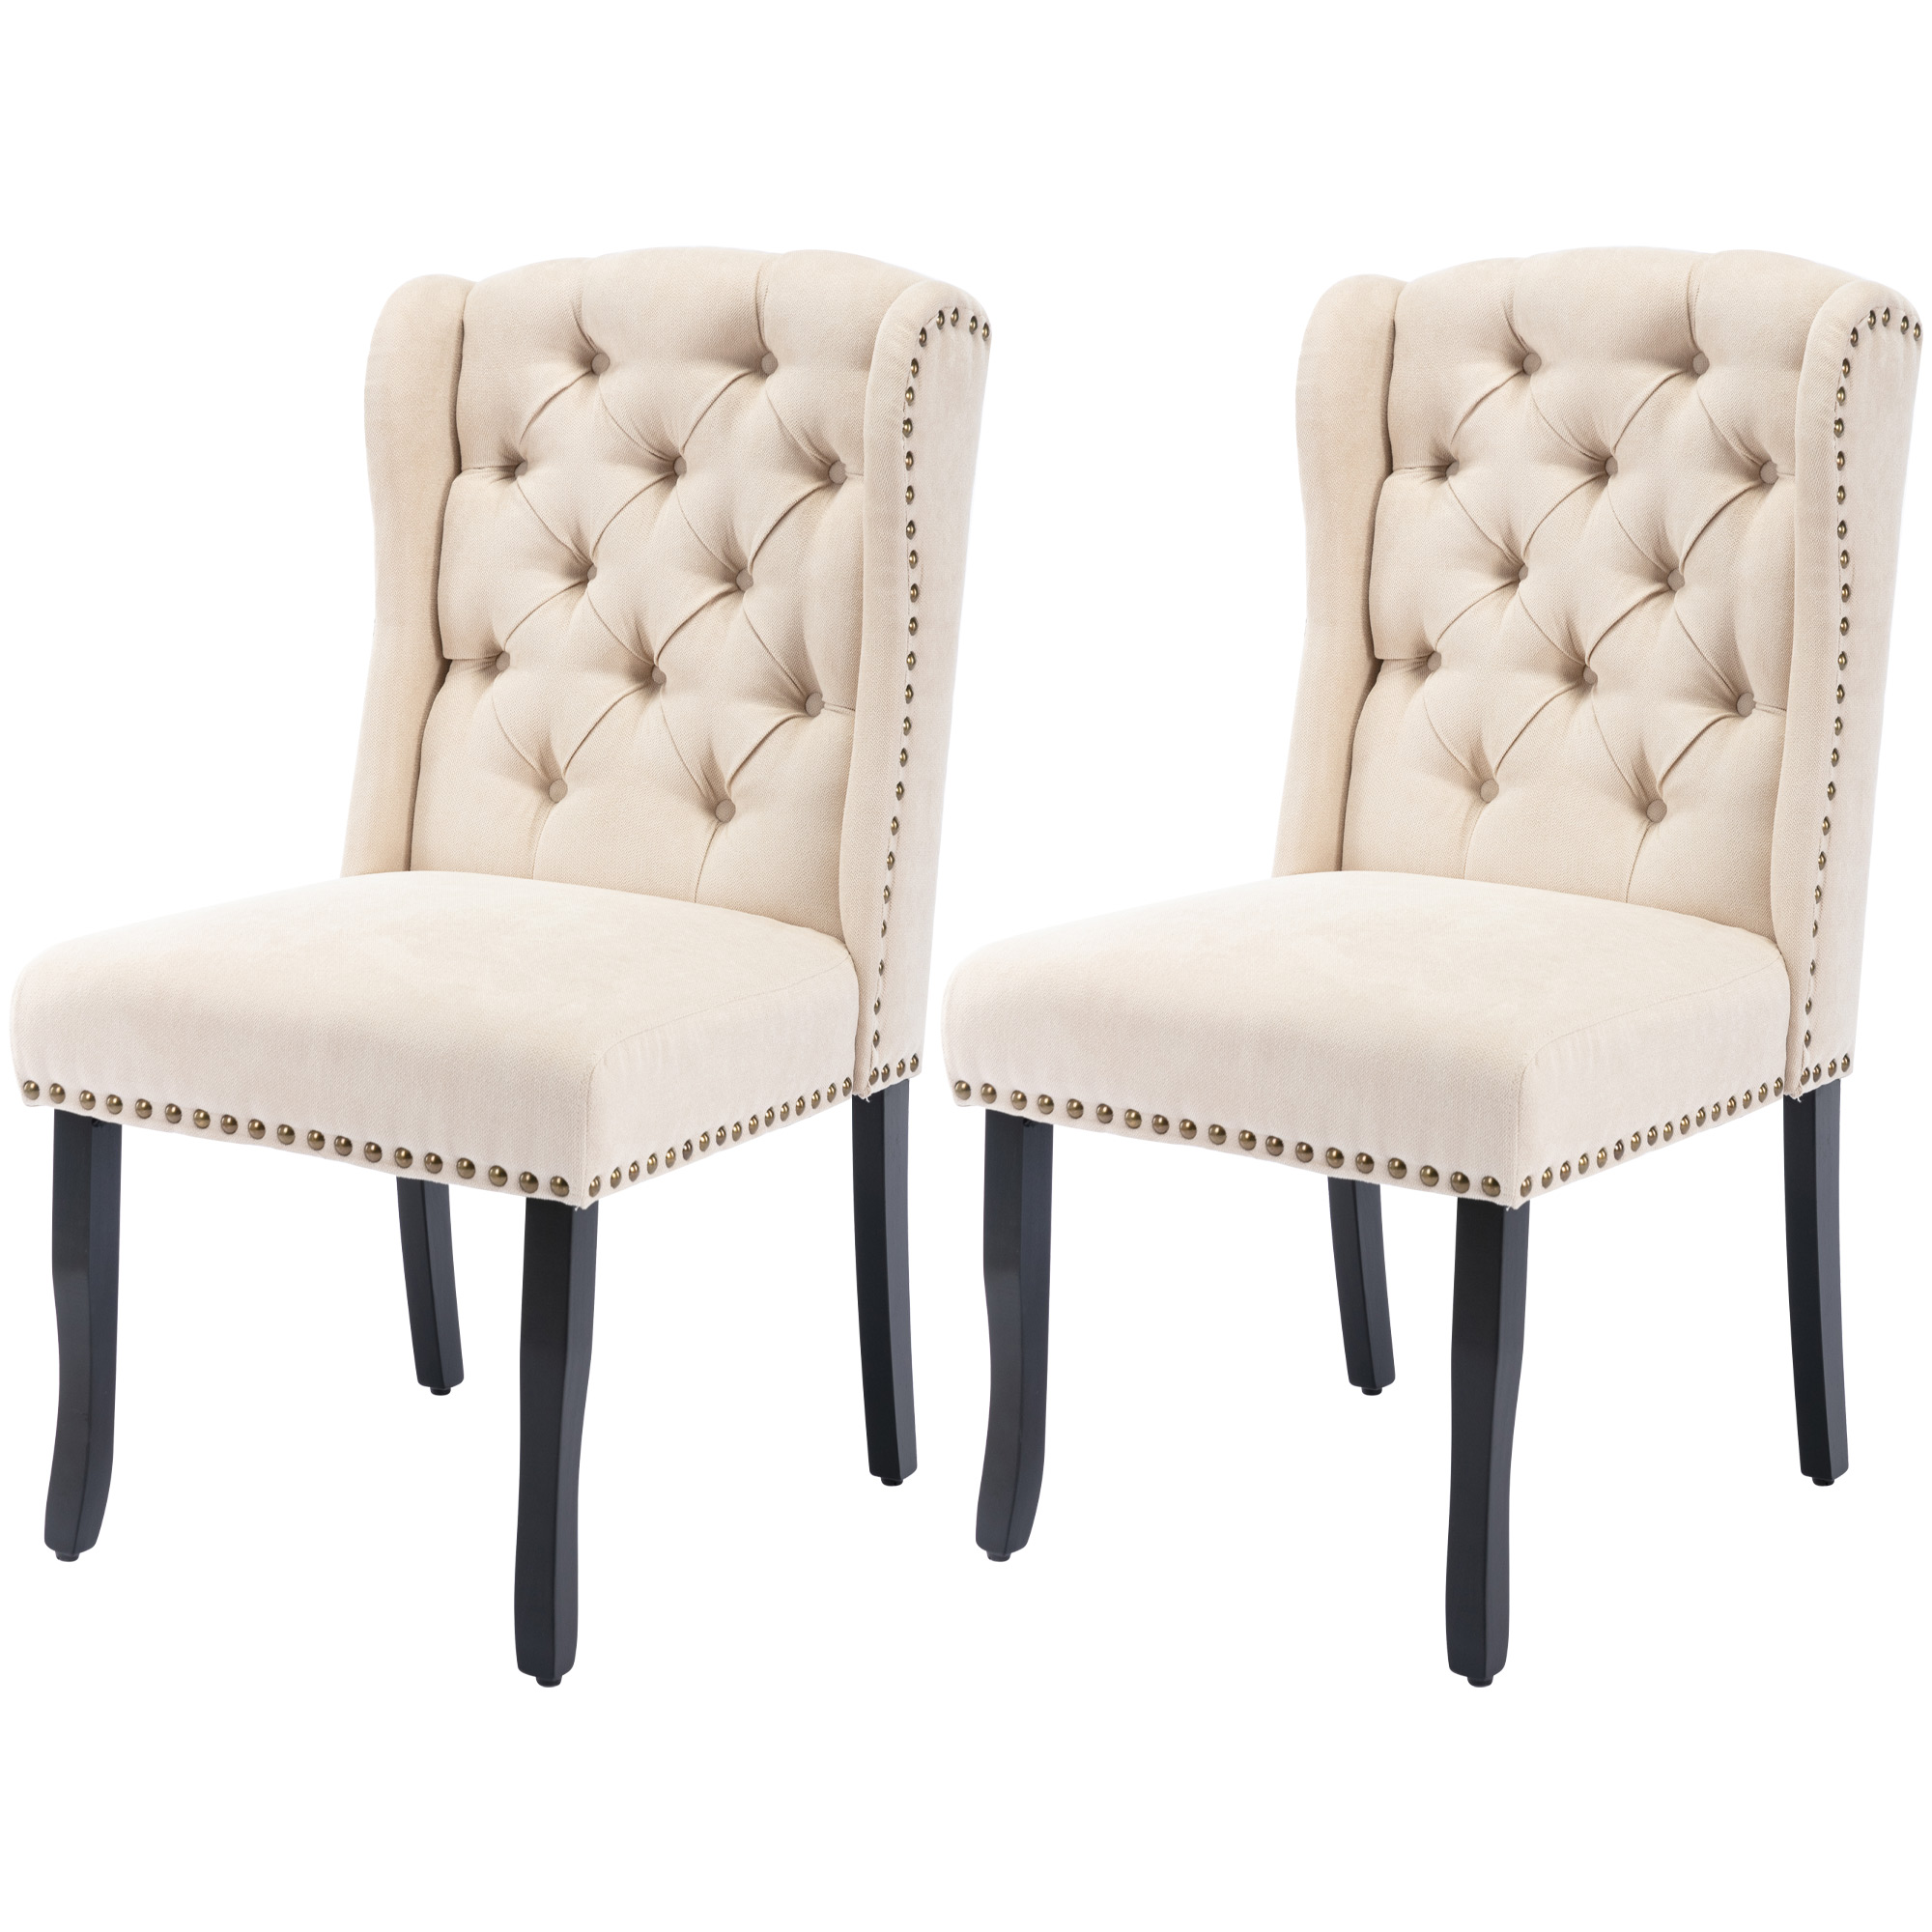 Cotton Fabric Dining Chairs, Set Of 2 - PP294970AAA